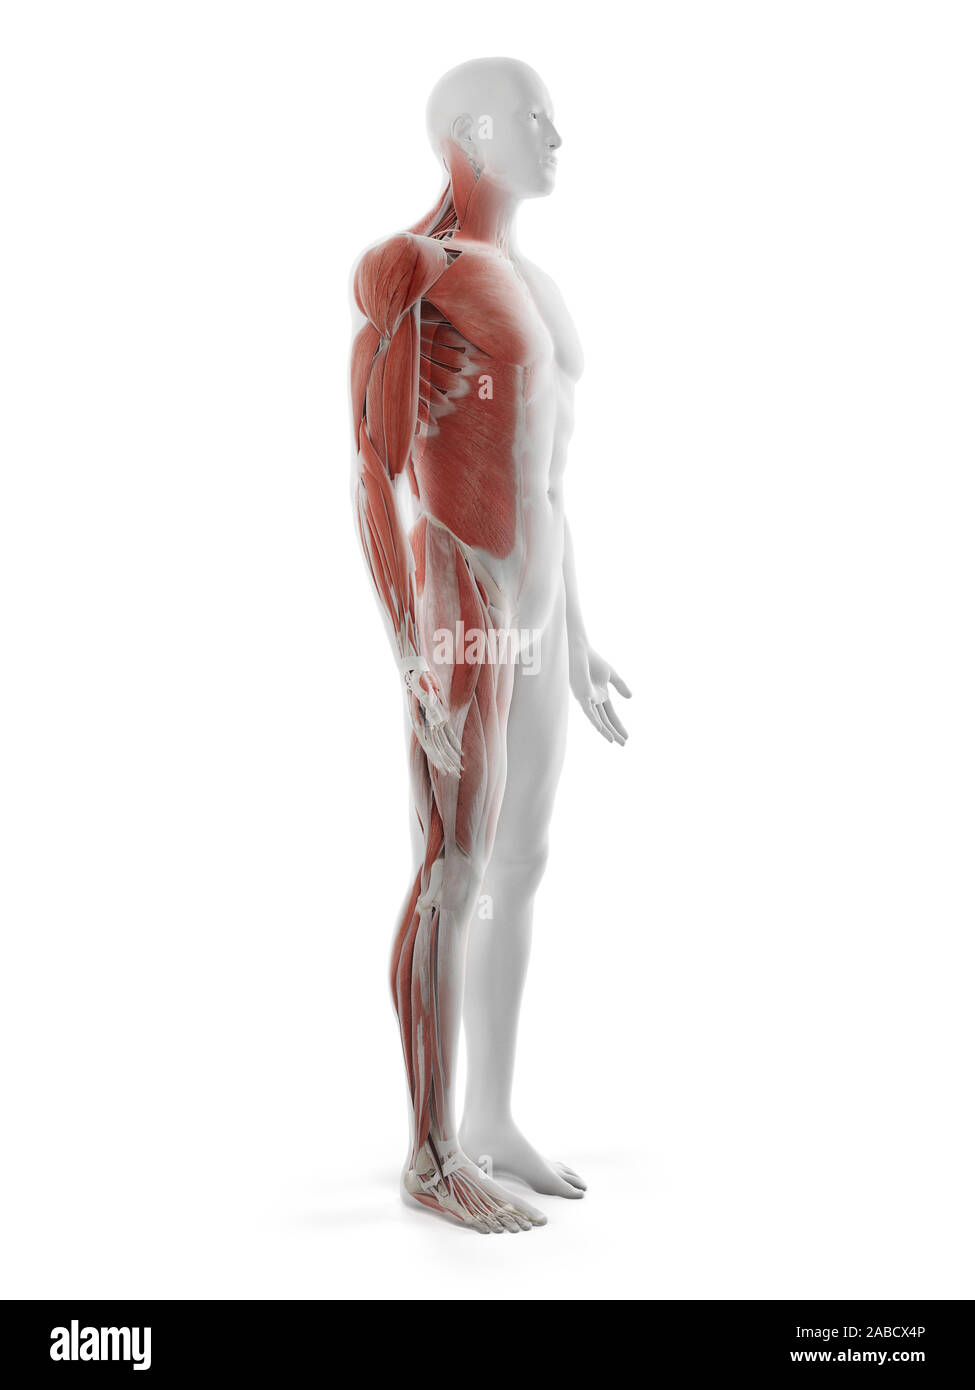 3d rendered medically accurate illustration of the male muscular system Stock Photo